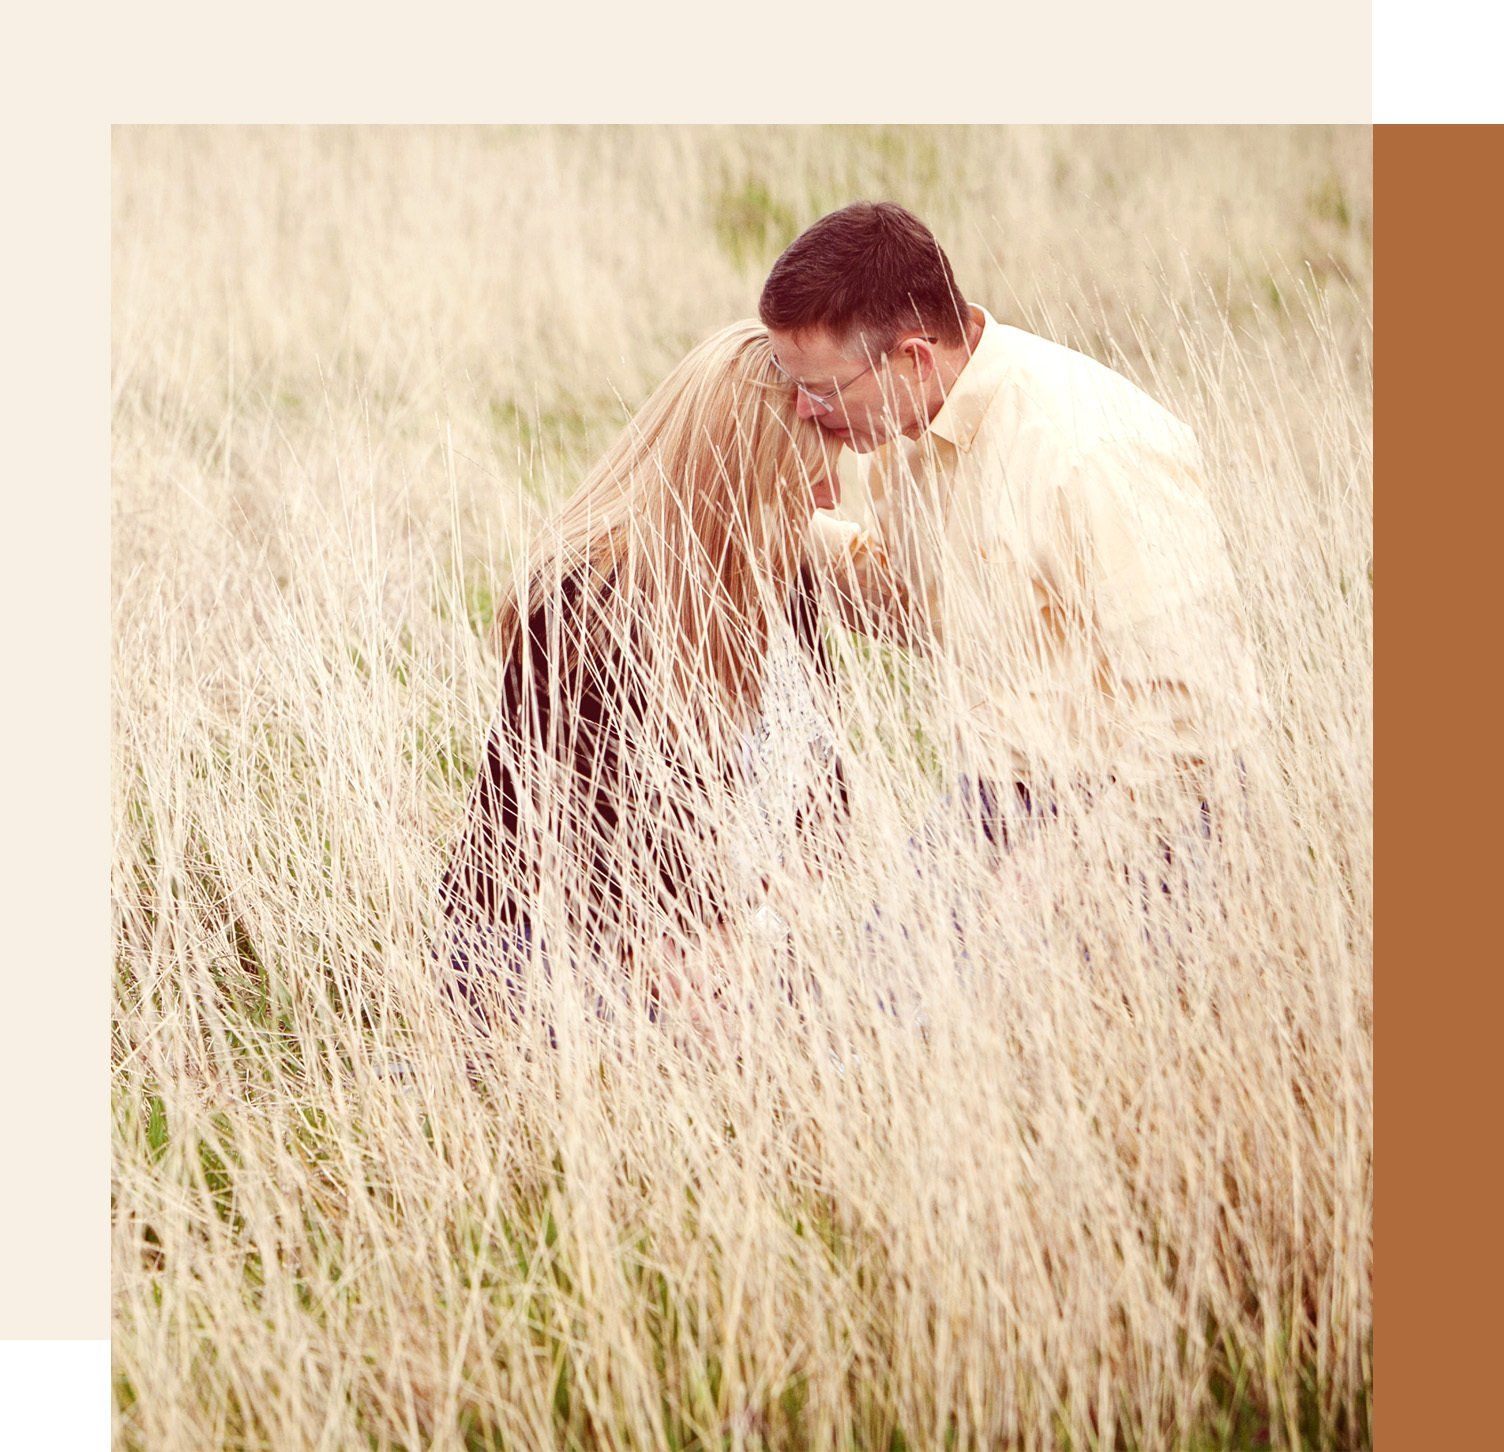 Husband and wife in grassy field kneeling together to pray